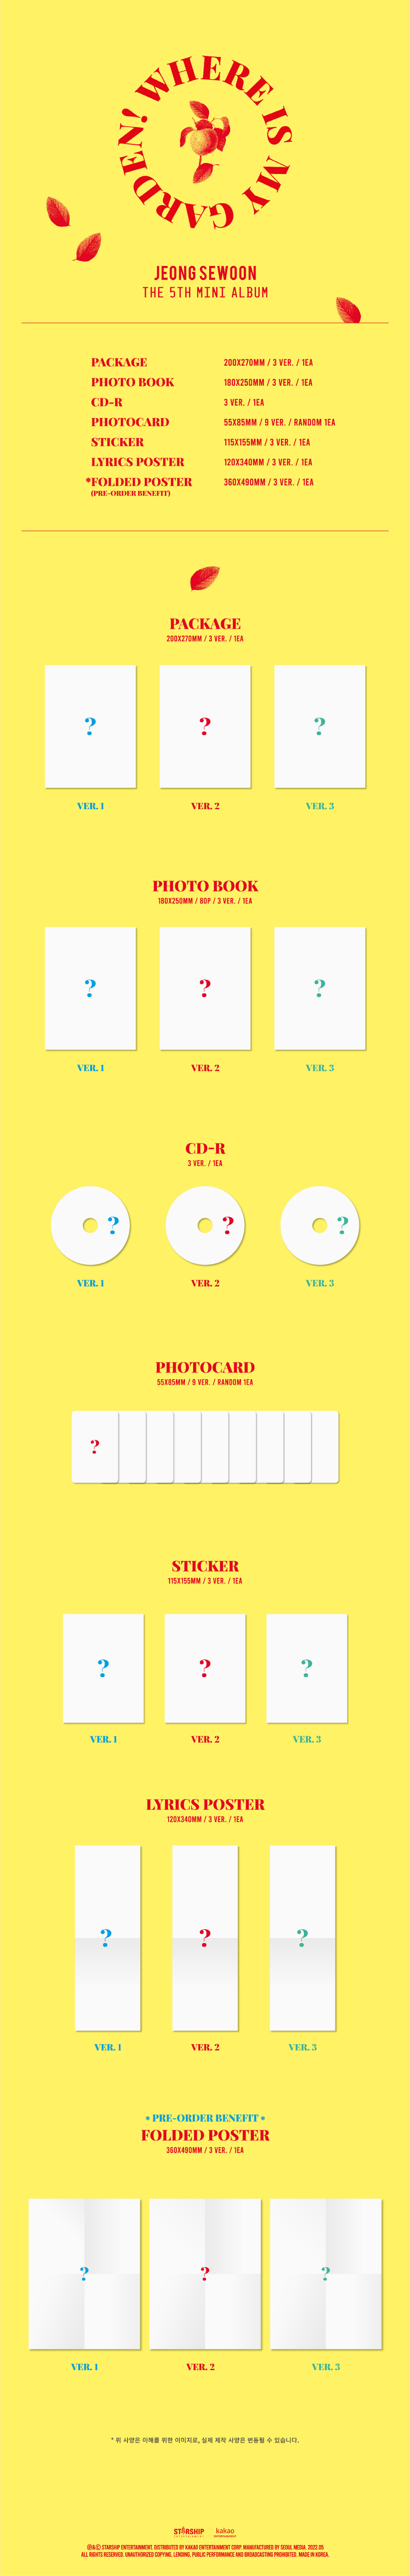 JEONG SEWOON - Where is my Garden! (Ver.1+Ver.2+Ver.3 SET) (5TH ALBUM) album jeongsewoon jeongsewoonalbum cd JEONGSEWOONcd WhereismyGarden WhereismyGardenalbum